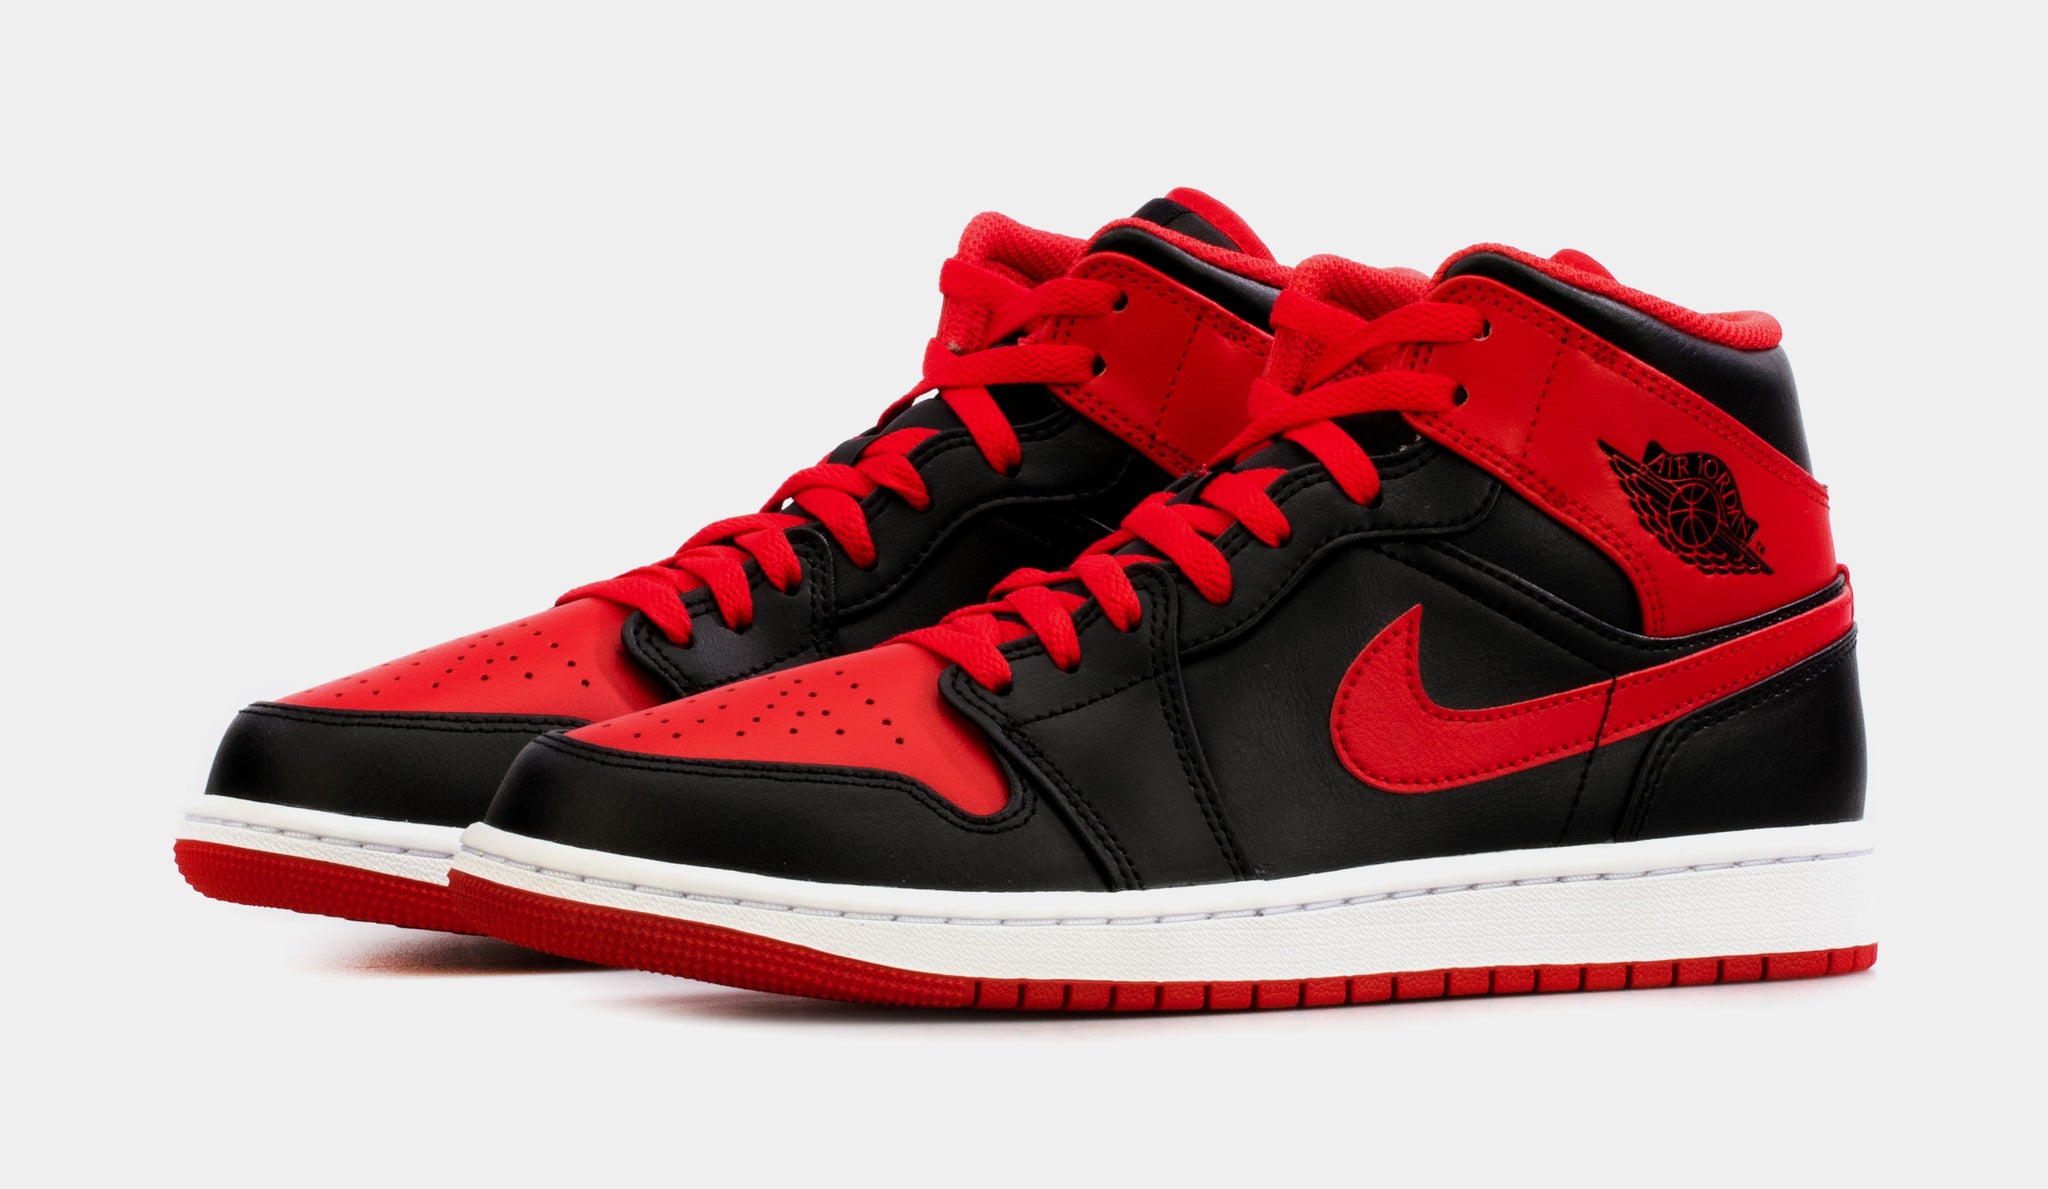 Air Jordan 1 Mid Alternate Bred Mens Lifestyle Shoes (Black/Red) Free  Shipping